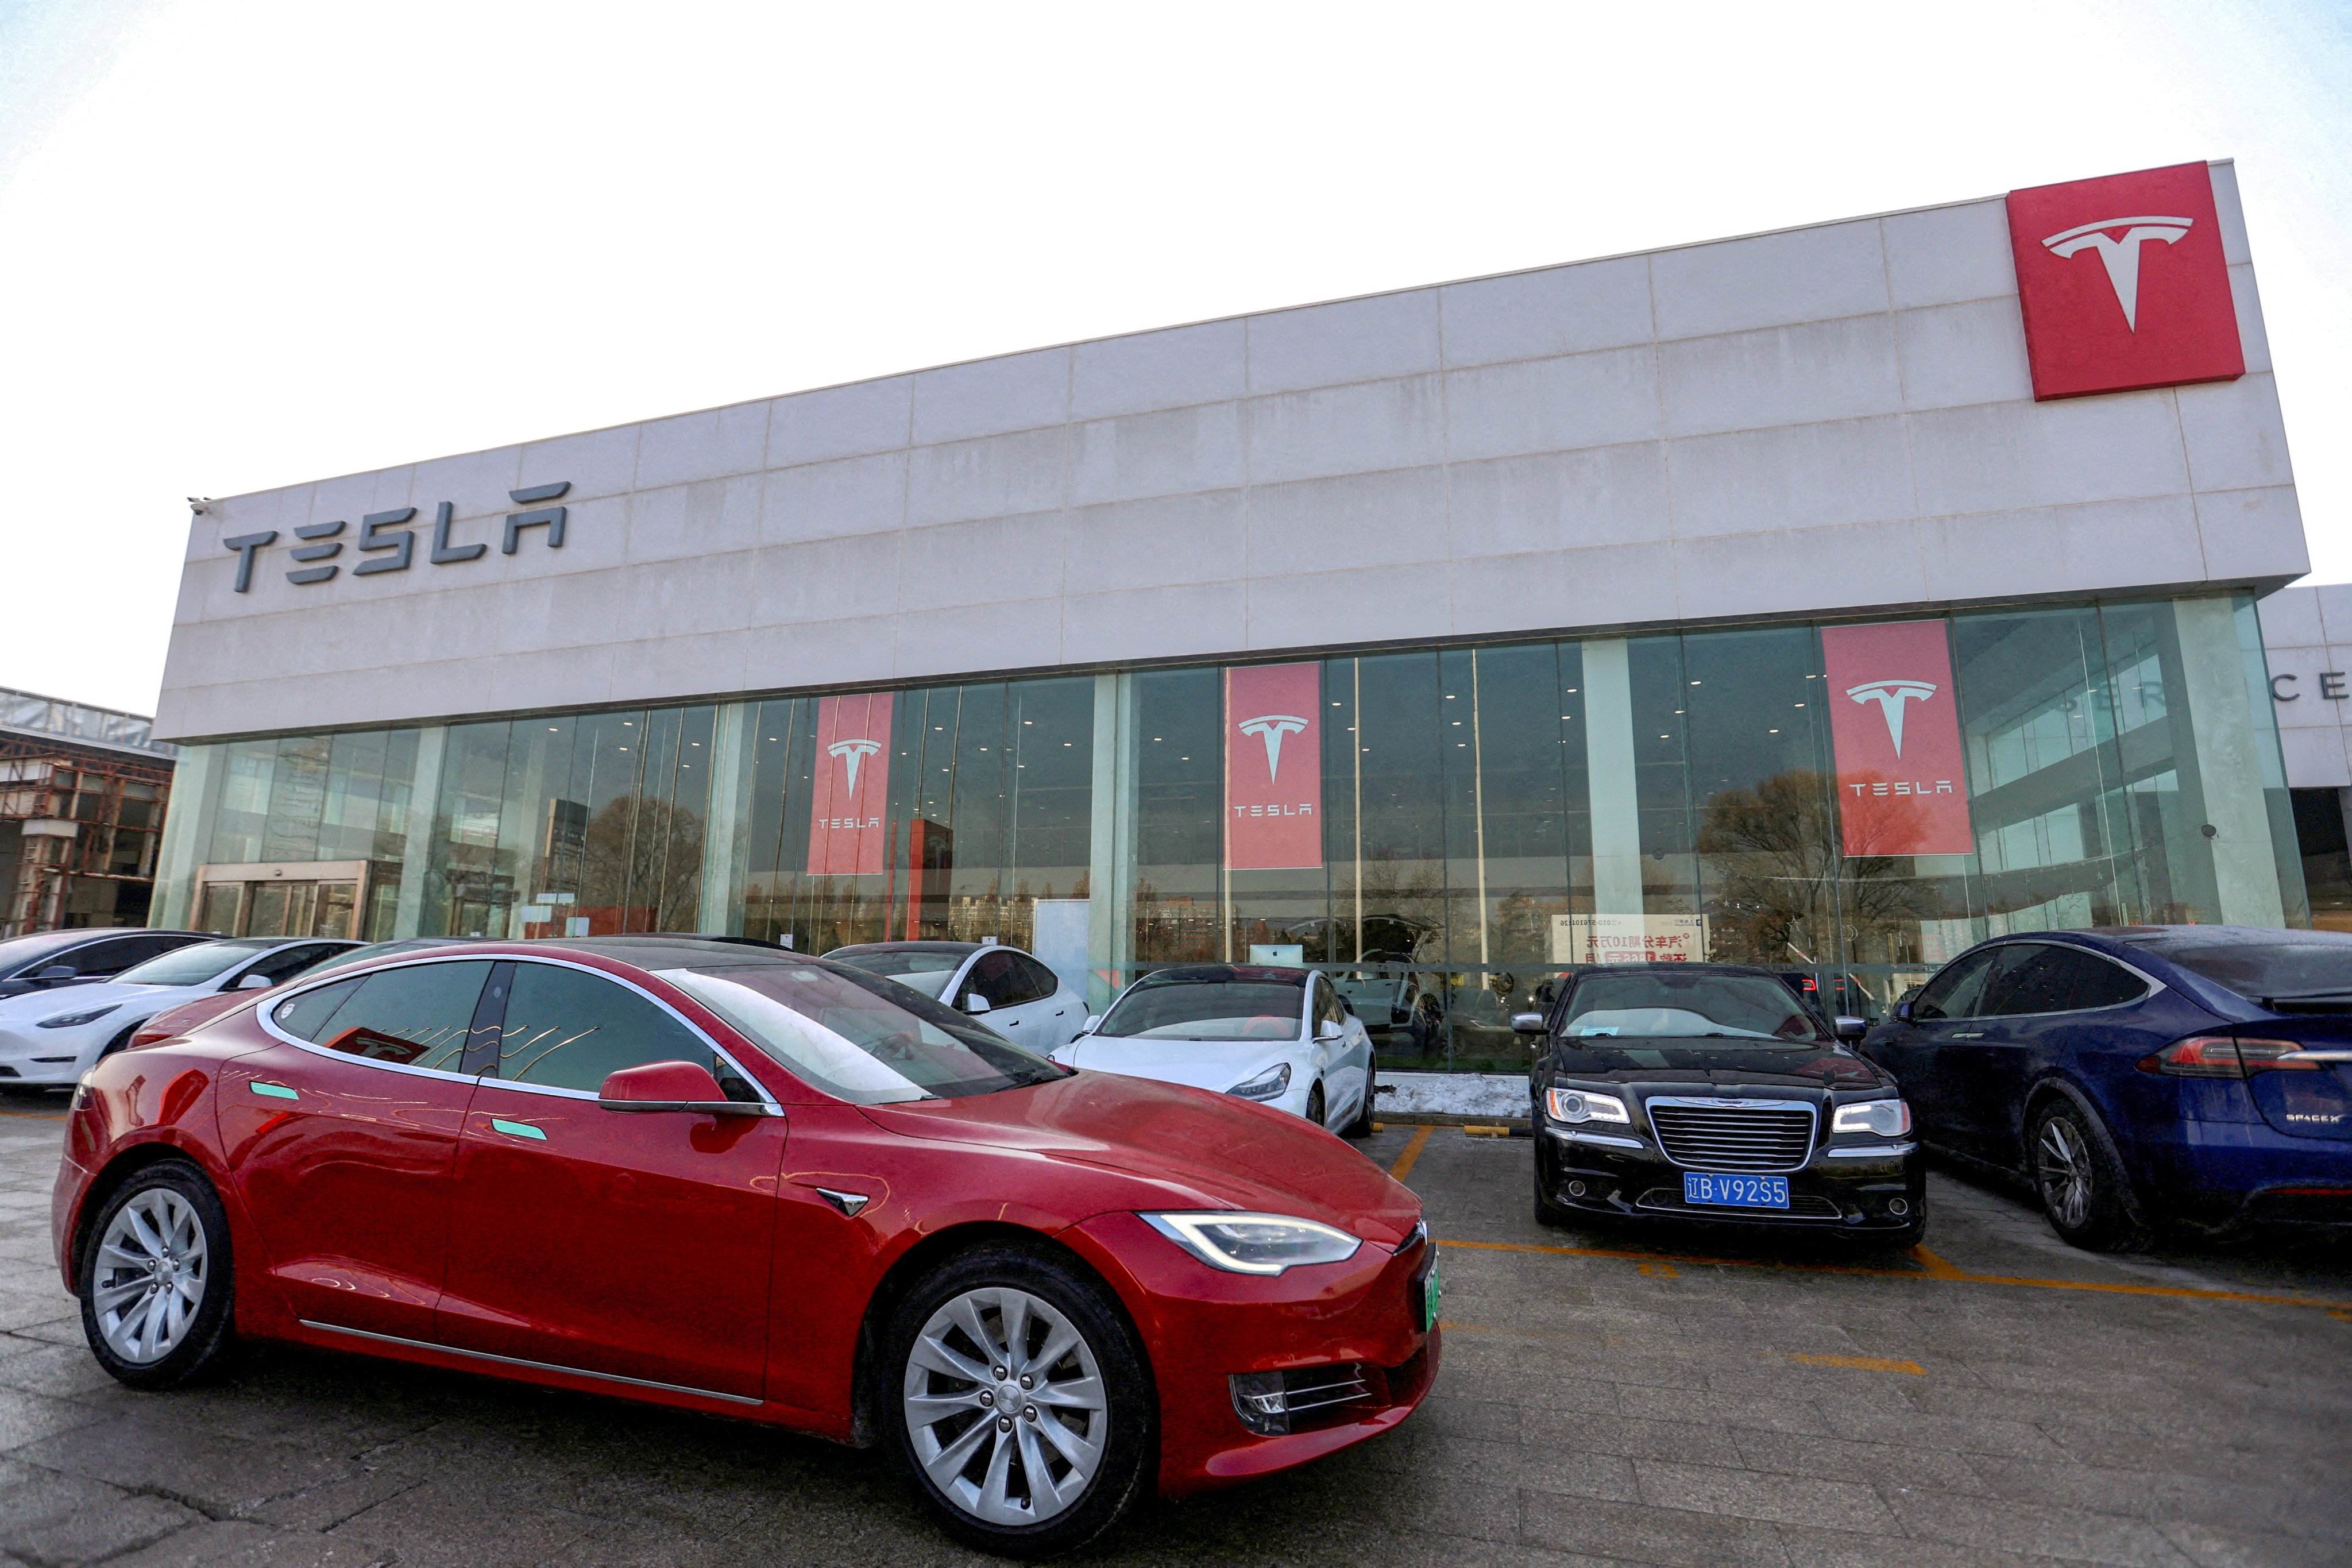 A Tesla showroom in Beijing. The US carmaker is giving a subsidy of 8,000 yuan to buyers who get their cars insured from its partners. The subsidy is valid until the end of March. Photo: Reuters